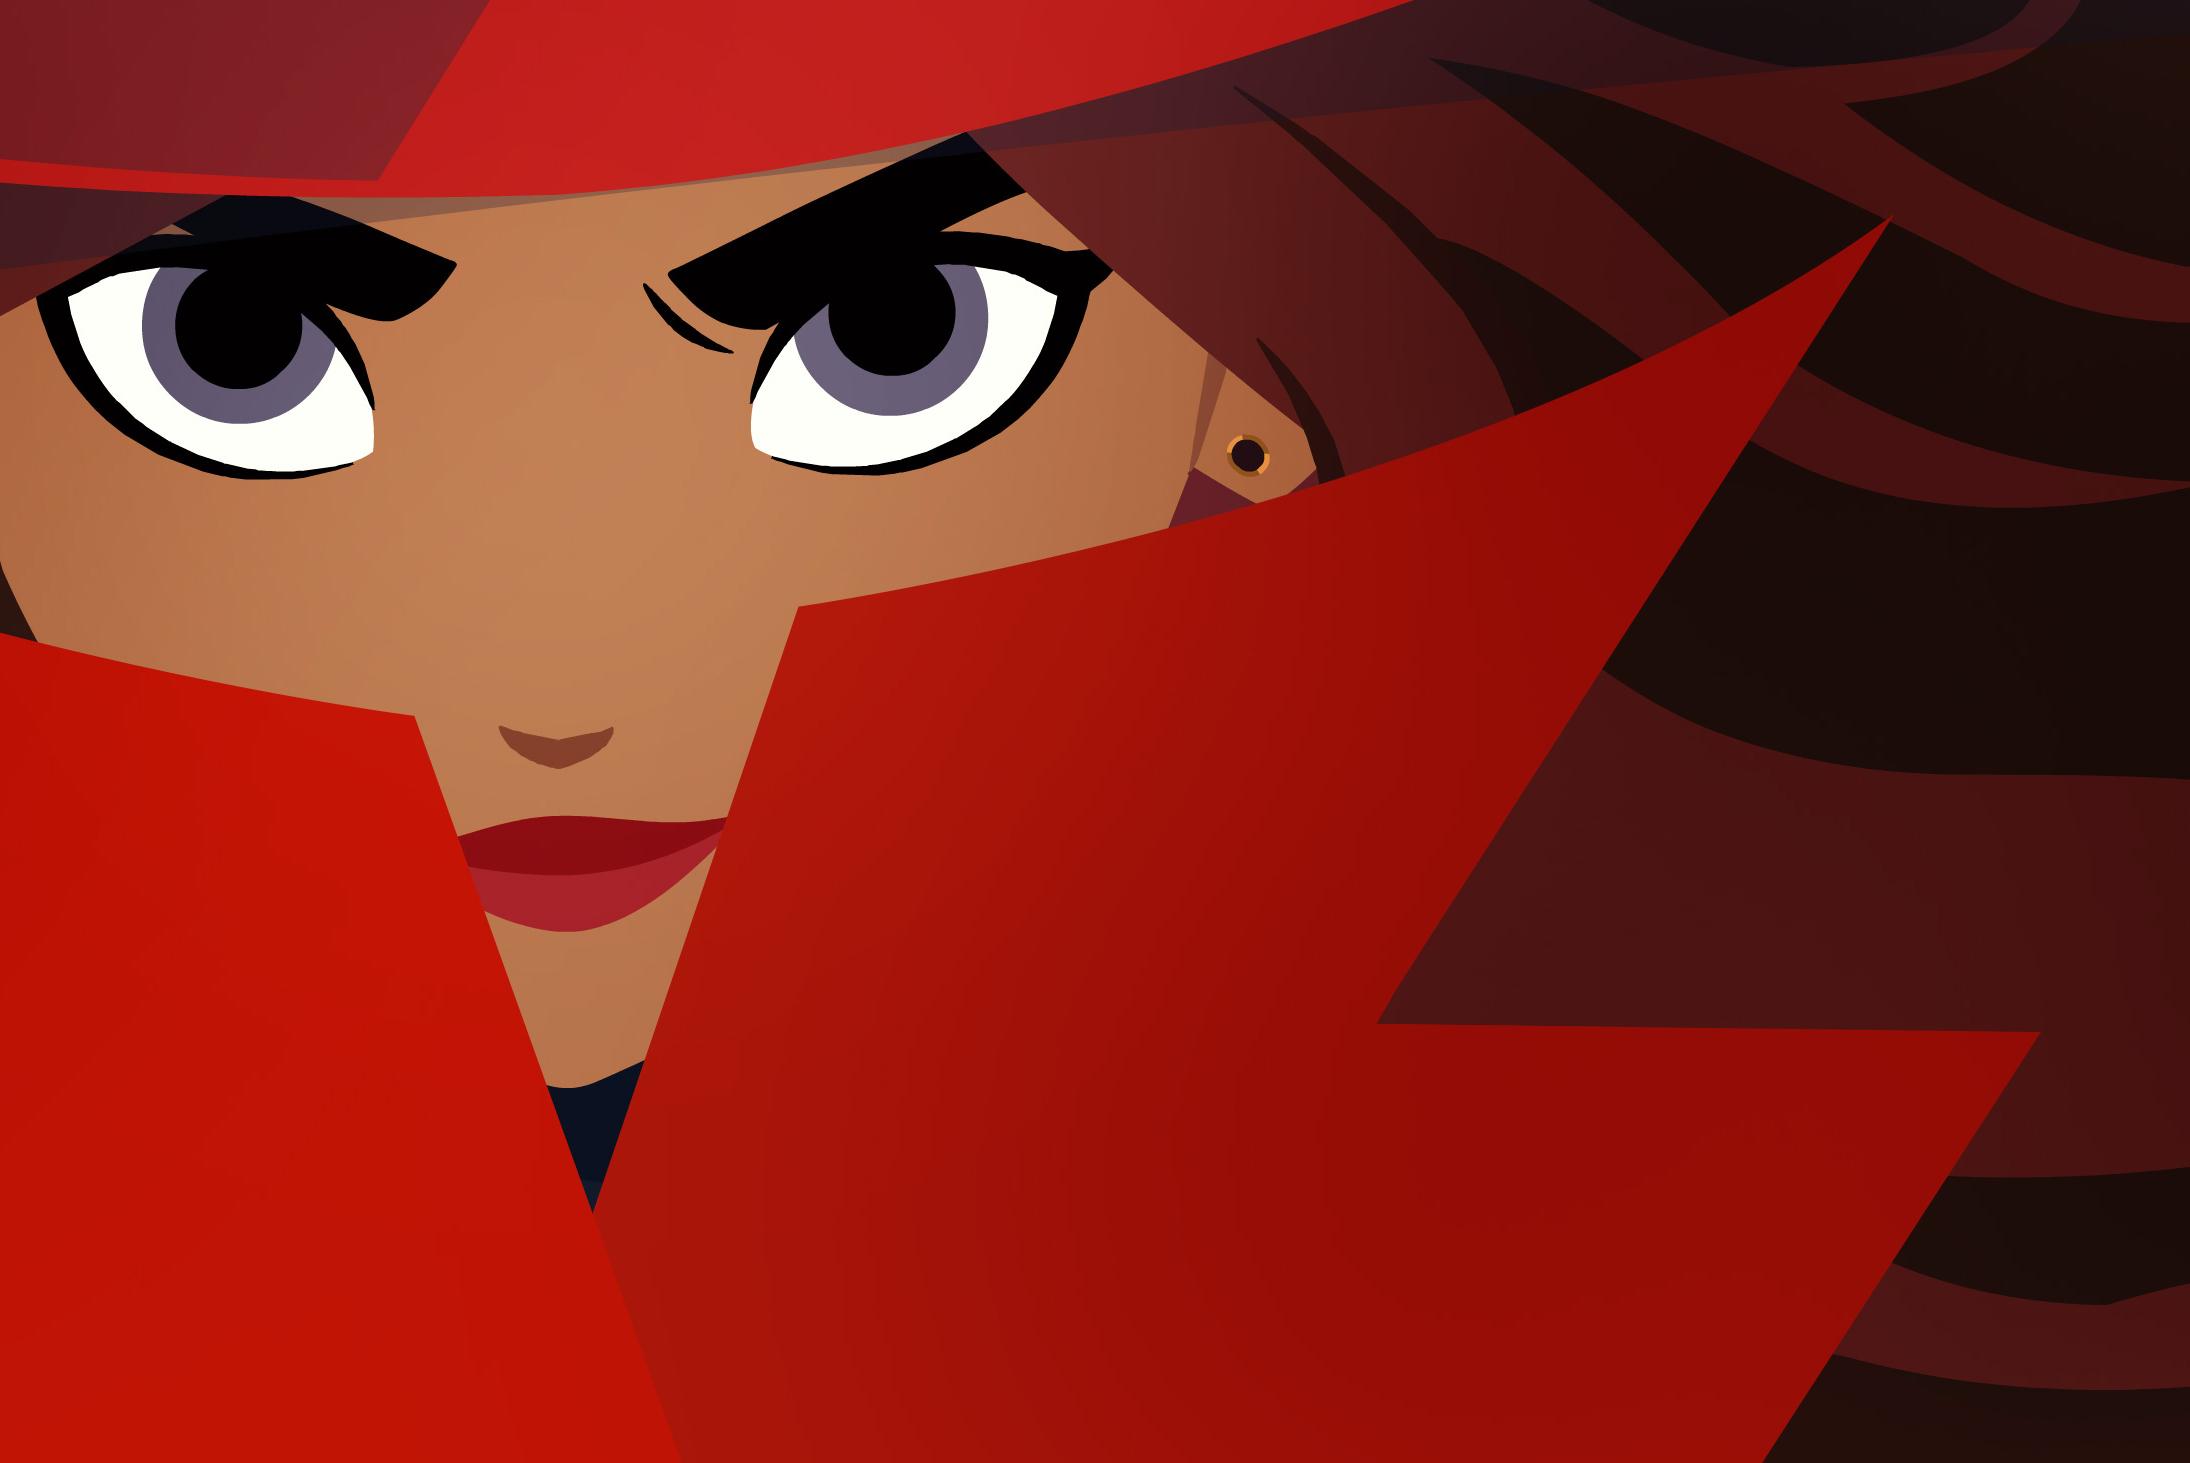 Netflix Reveals First Look at Animated “Carmen Sandiego” Reboot